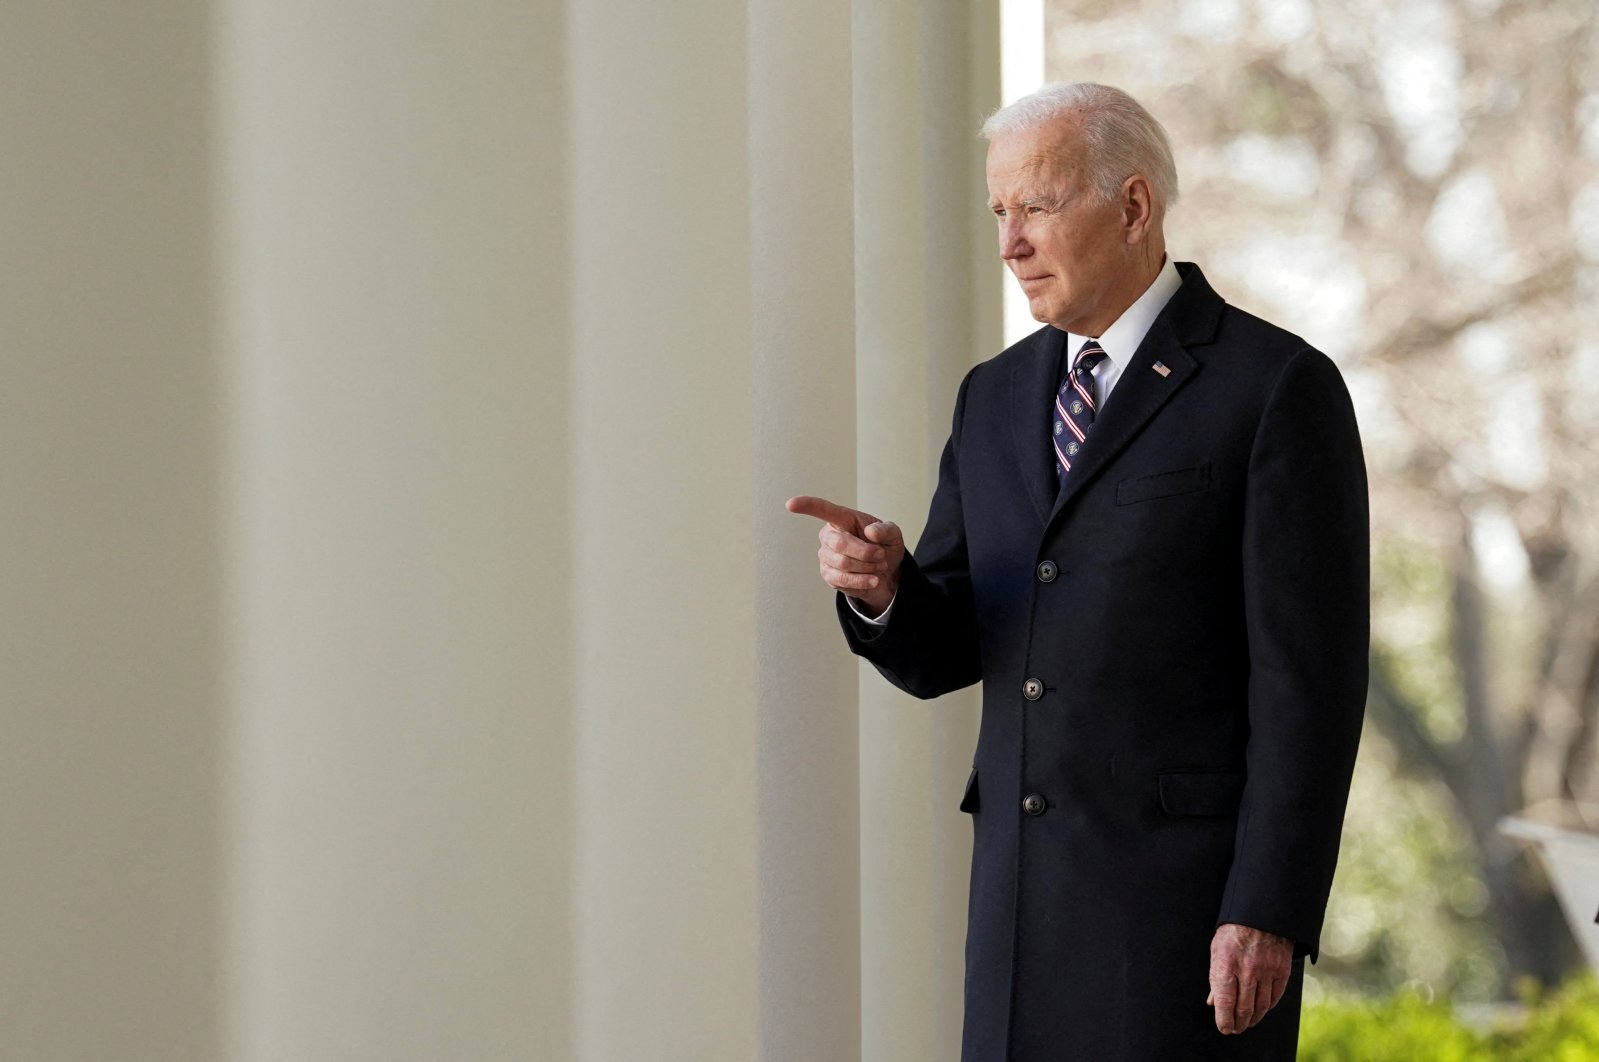 U.S. President Joe Biden enters the Rose Garden during a ceremony at the White House in Washington, U.S., March 29, 2022. (Reuters Photo)